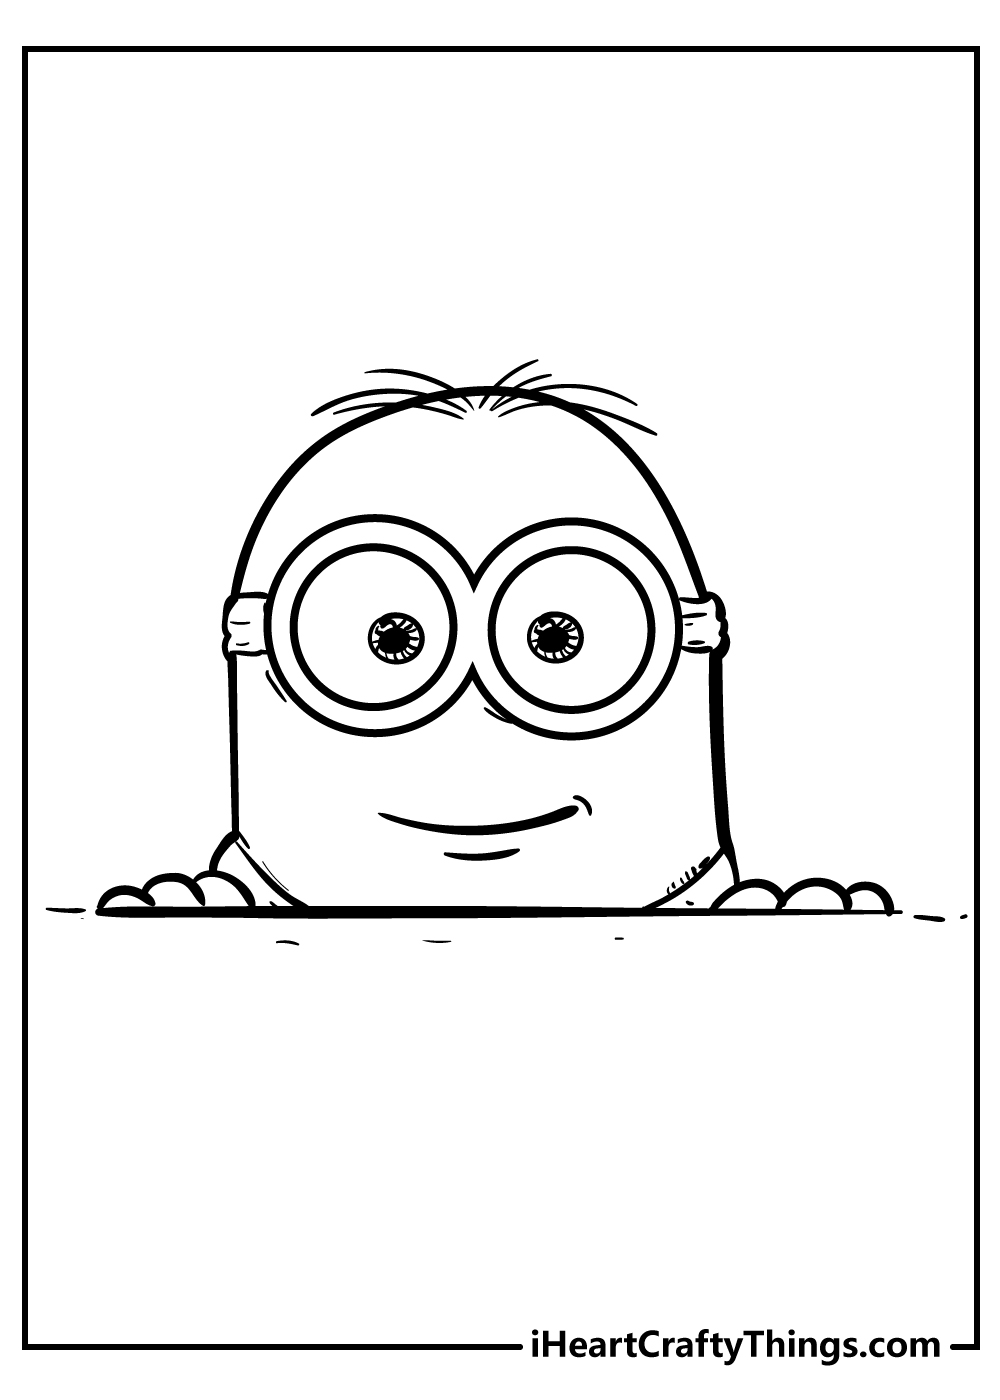 Minions Coloring Pages for kids free download